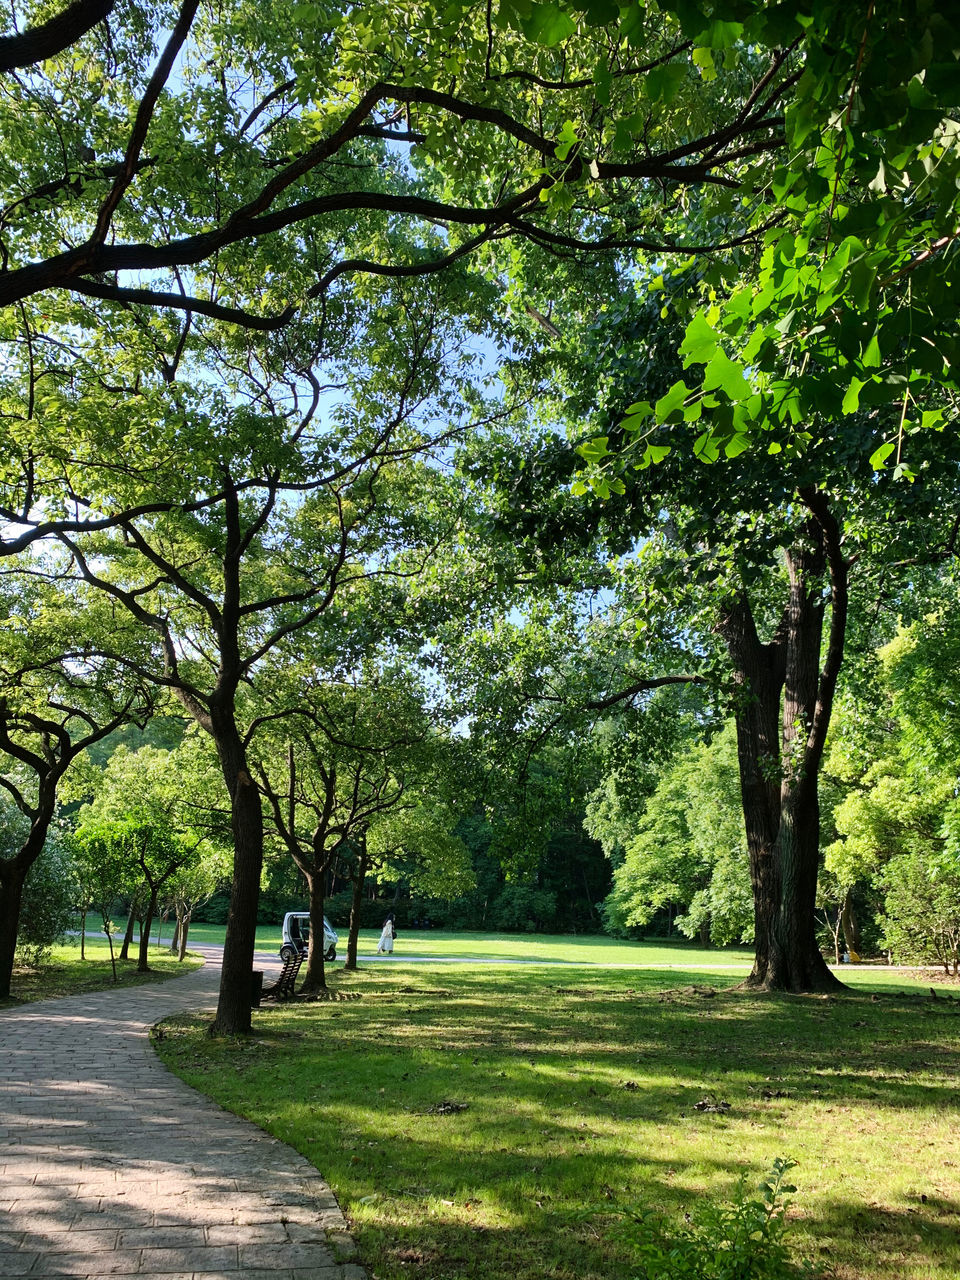 VIEW OF TREES ON FOOTPATH IN PARK